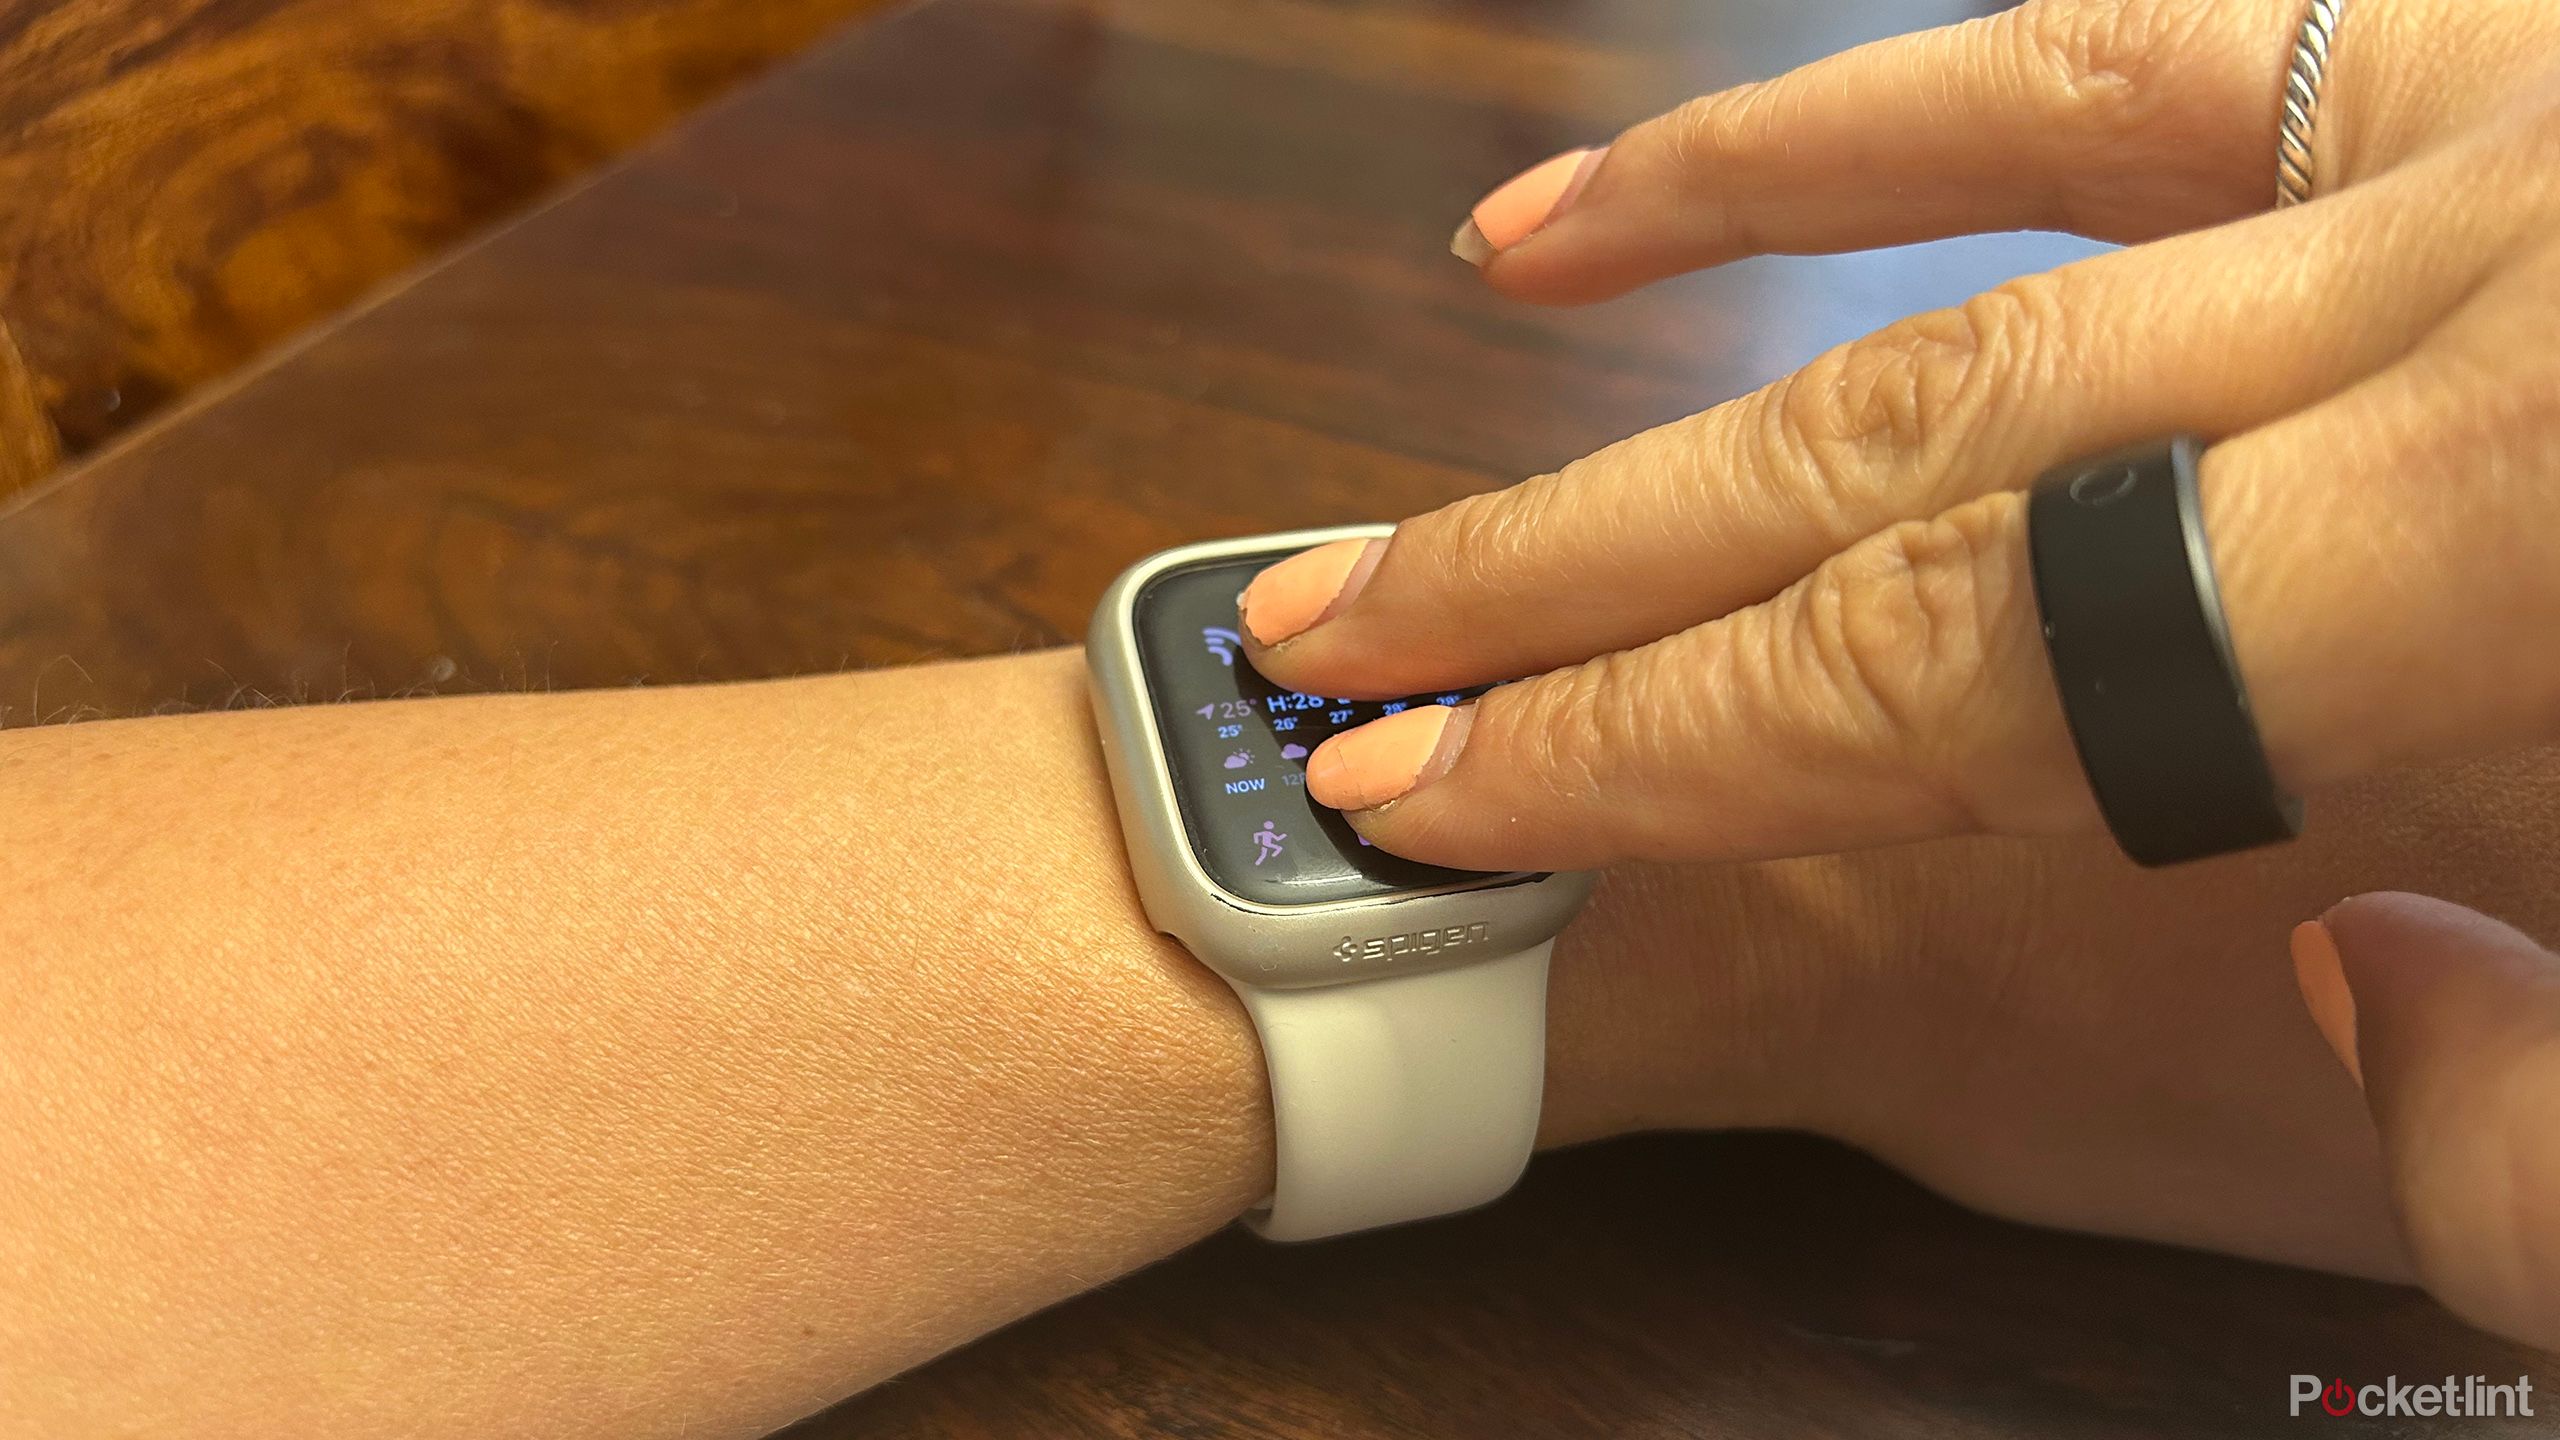 Wear the Apple Watch on your wrist and place two fingers of your other hand on the screen